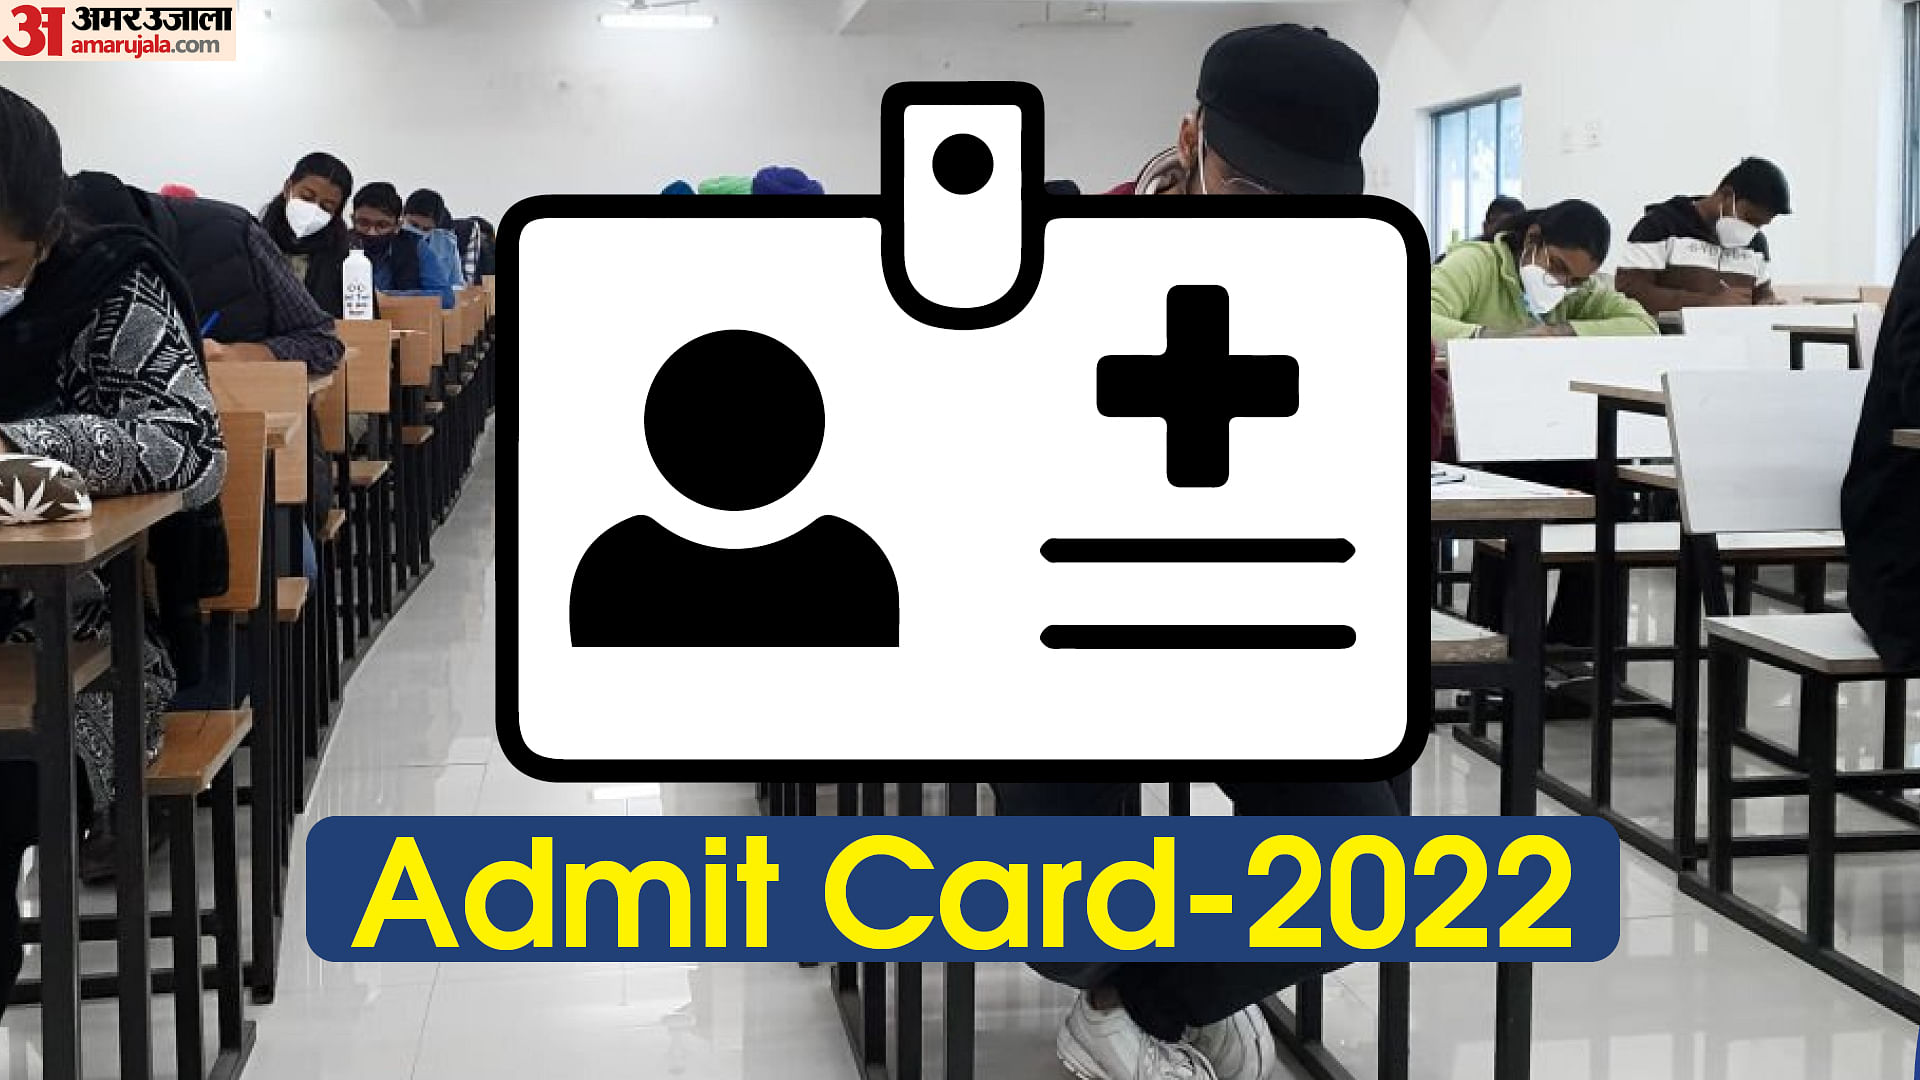 Rajasthan Police Constable Admit Card 2022 Out, Direct Link to Download Here